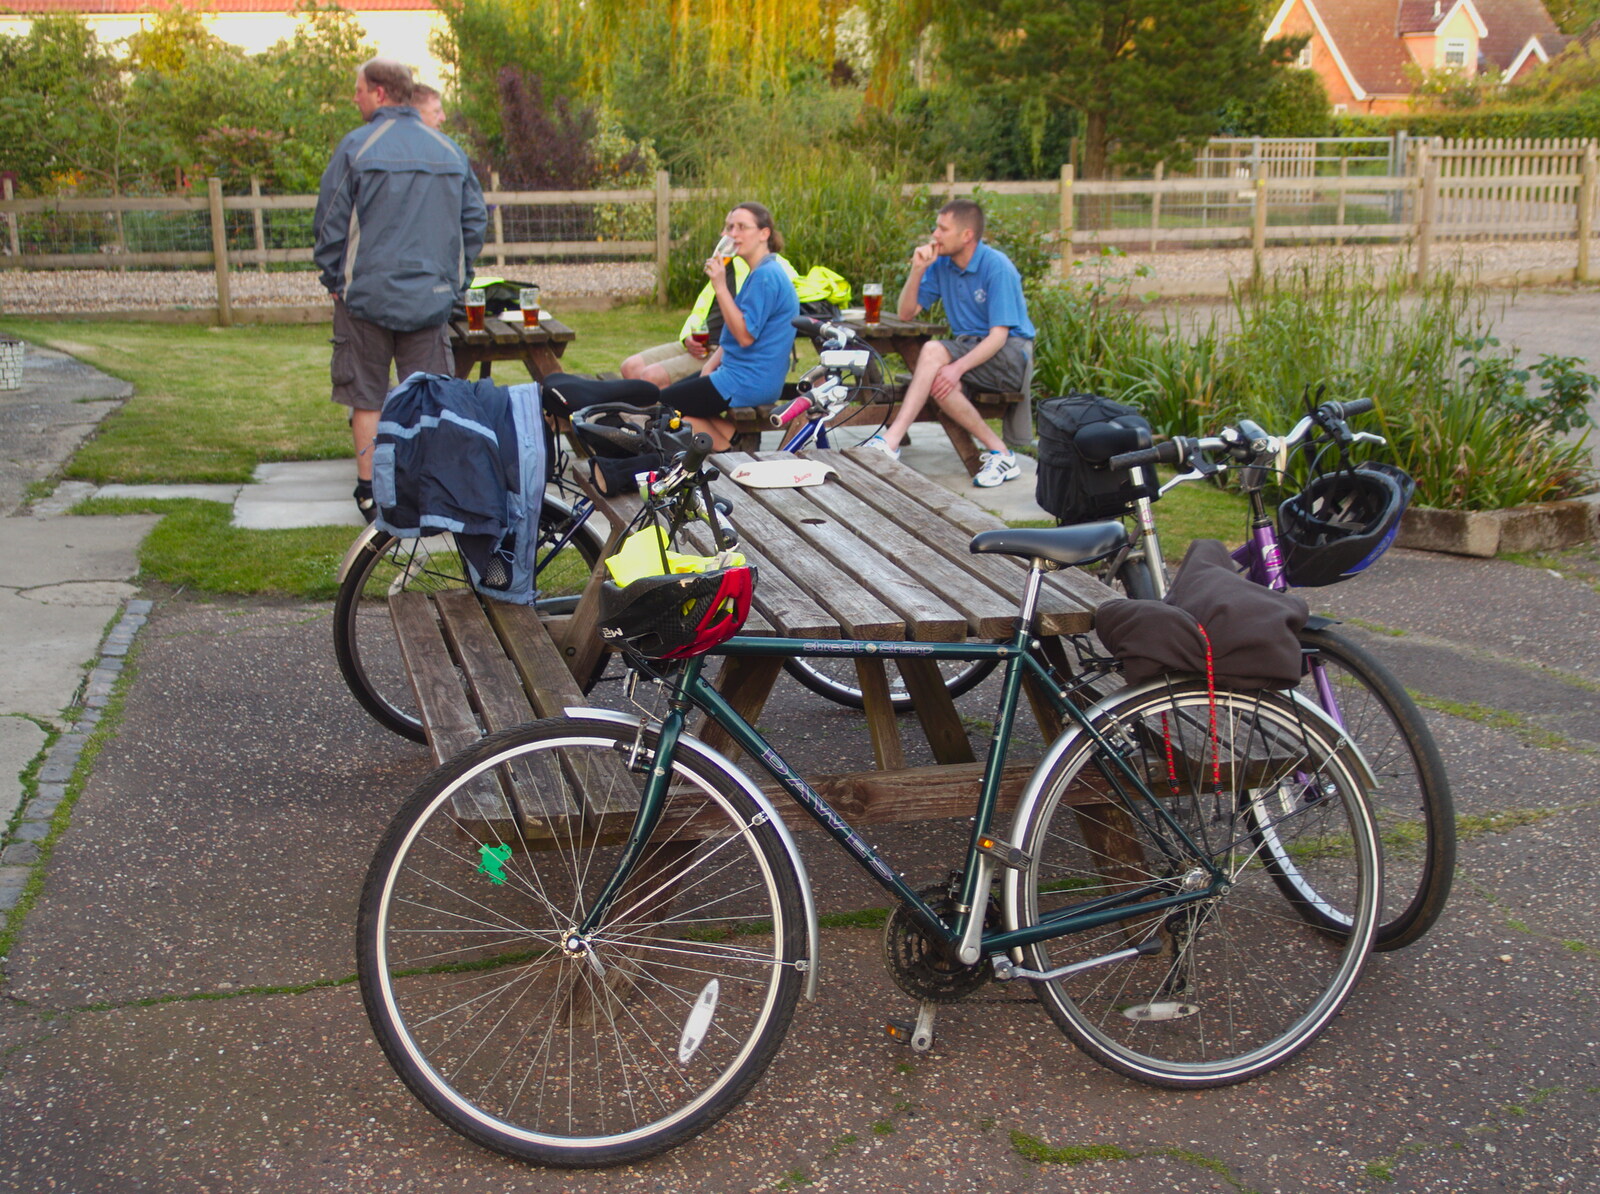 A pile of bikes from The BSCC at The Crown, Bedfield, Suffolk - 15th May 2014